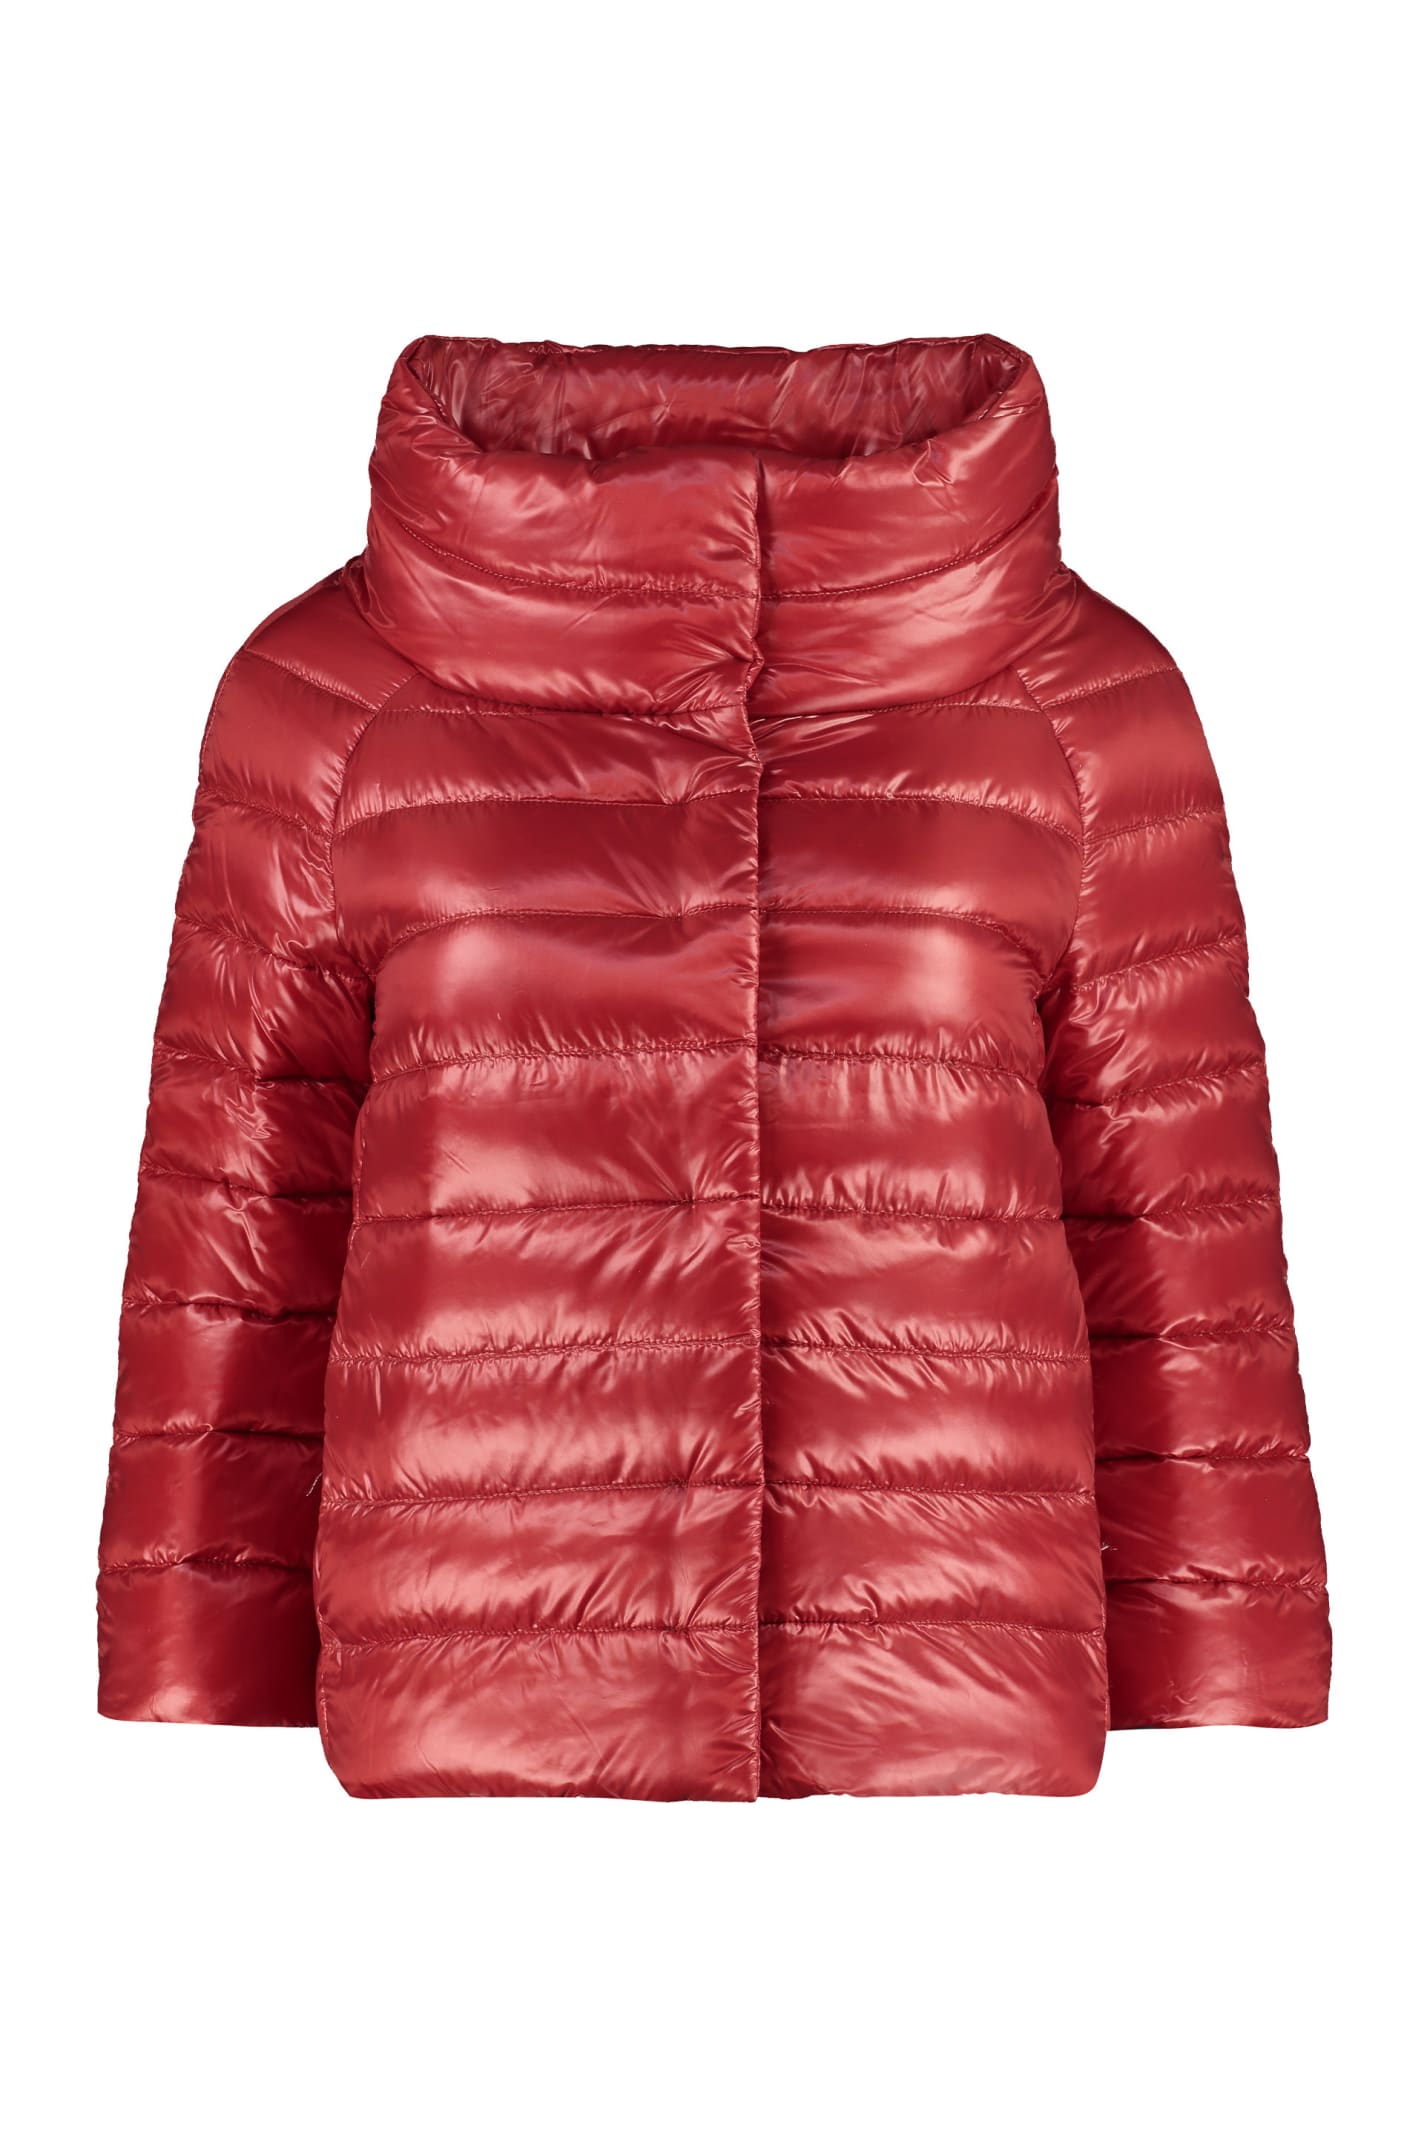 Herno Burnt Henna Quilted Down Jacket